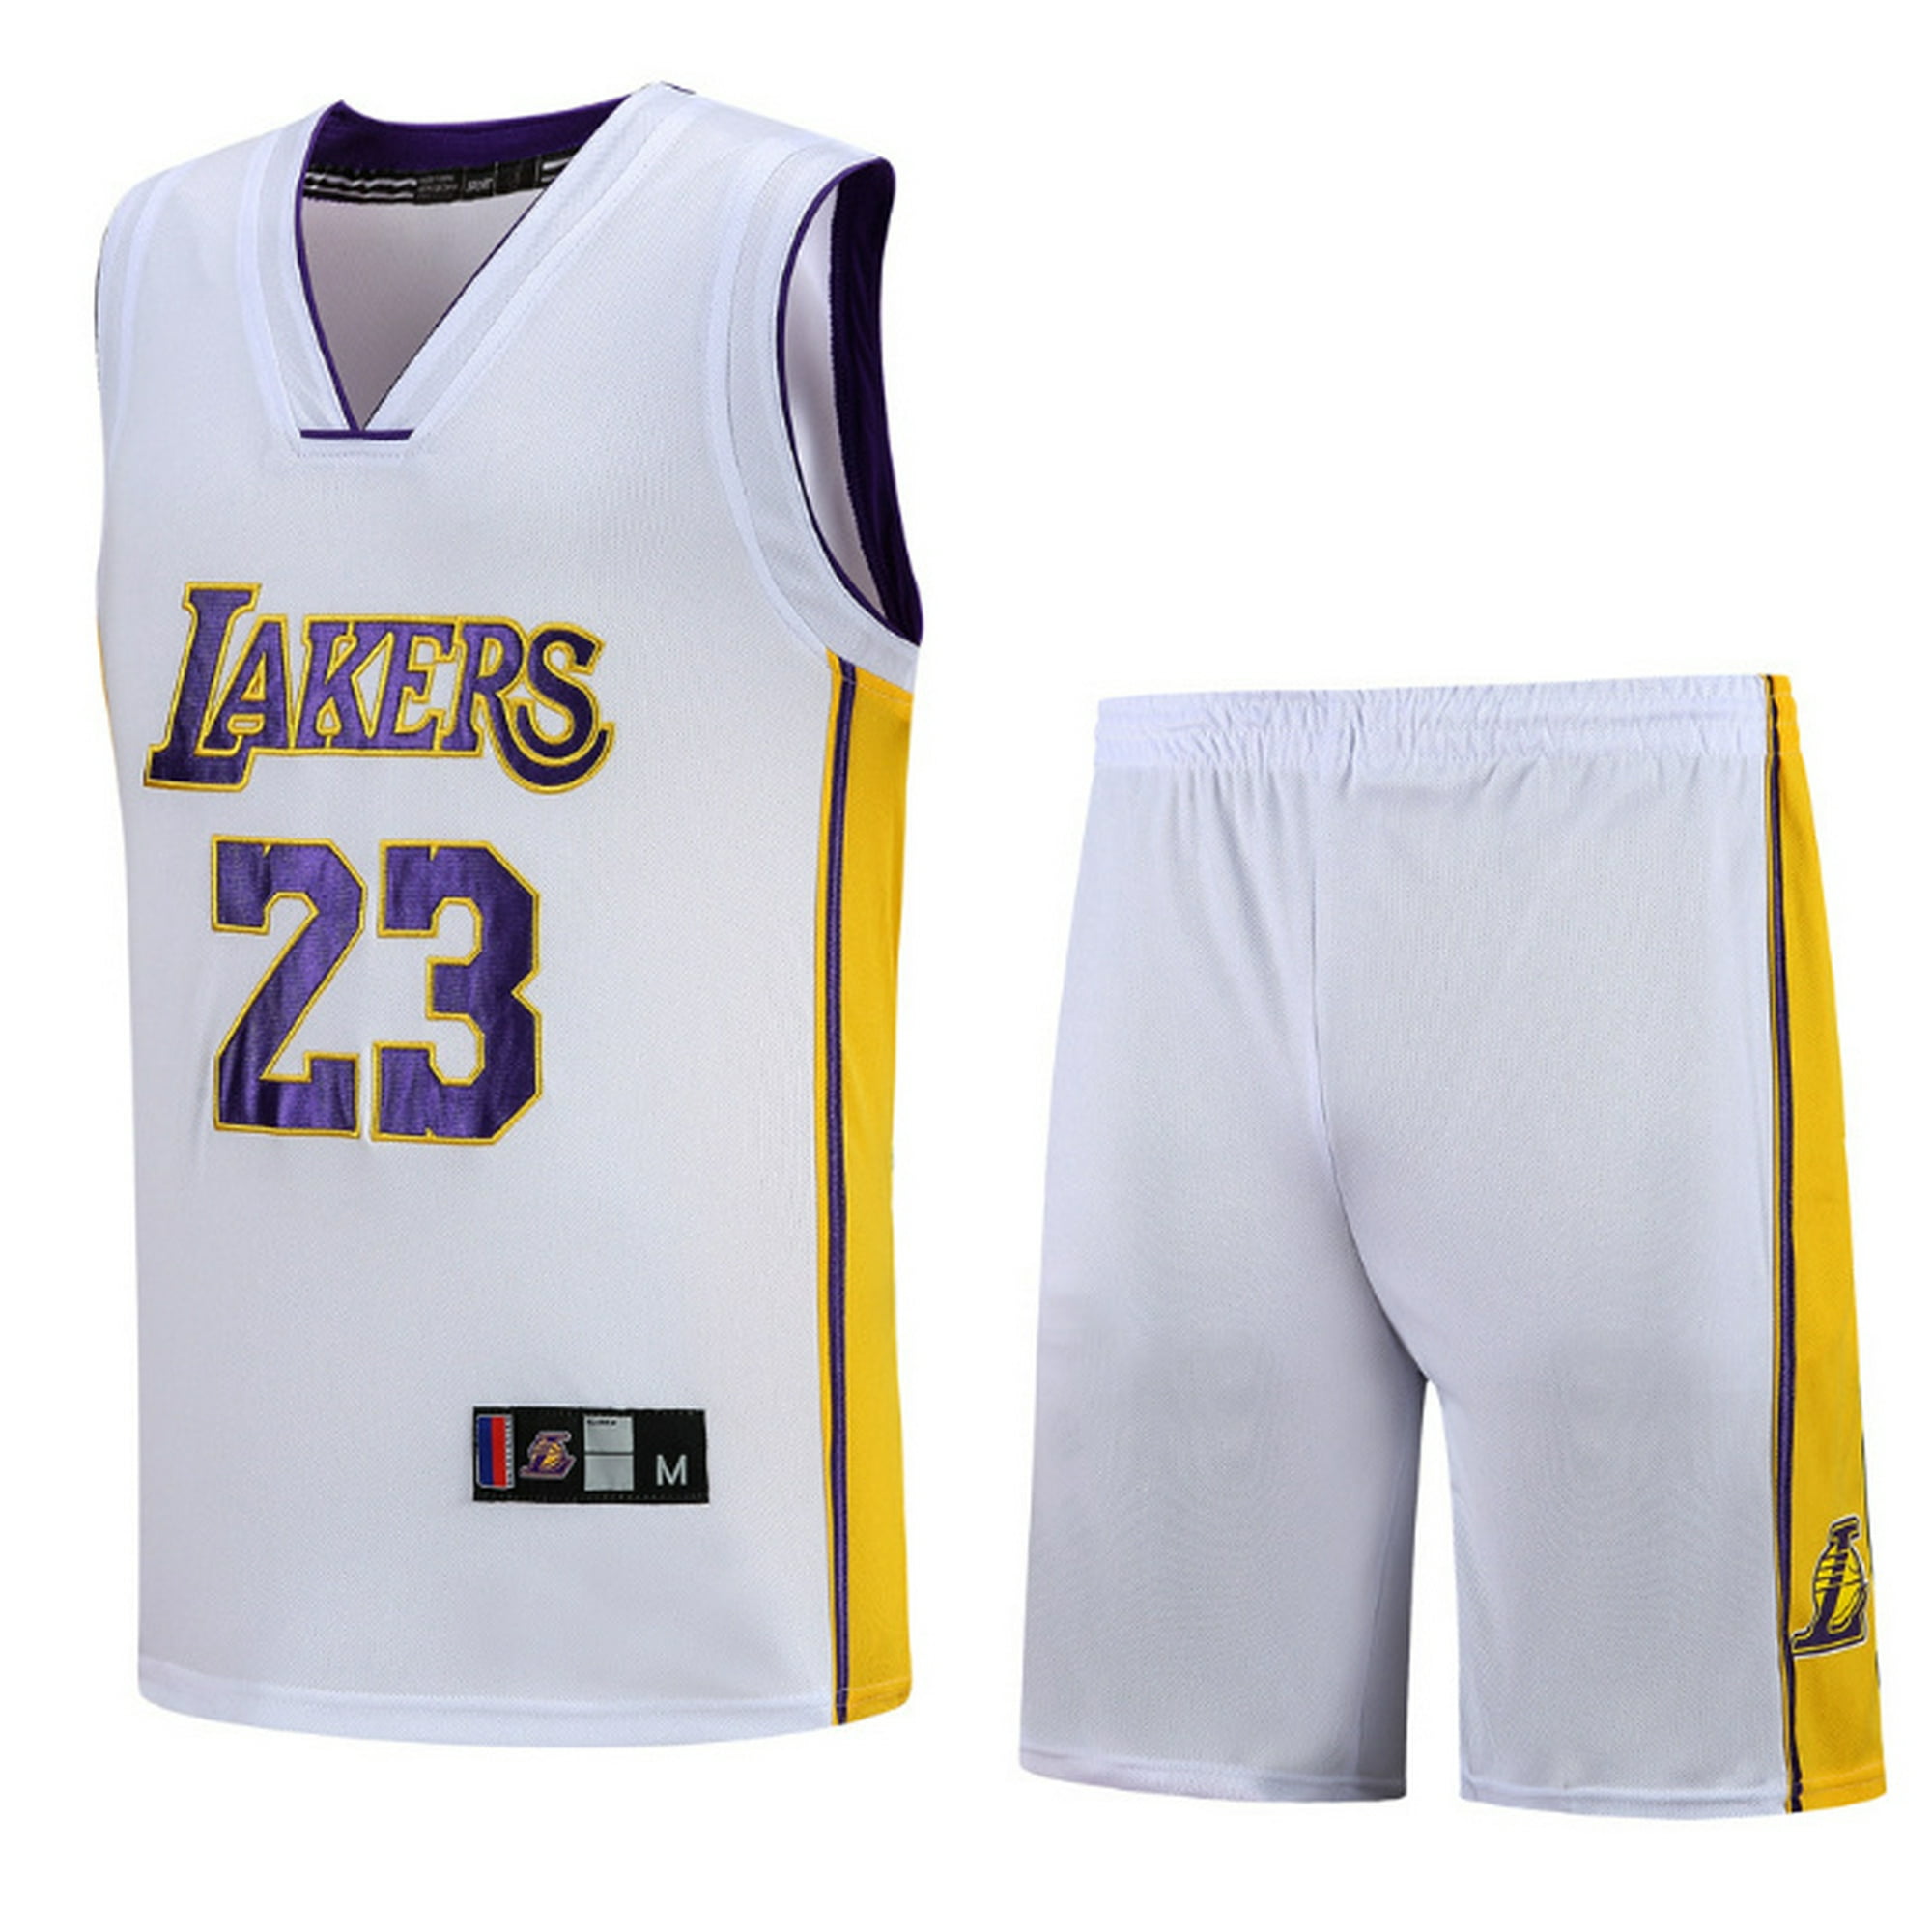 Pedymaquem Men's Basketball Jersey L.A. Lakers Lakers23#Splicing T-Shirt Player Jersey Shorts Sports Suit Size S-3xl Other M 48